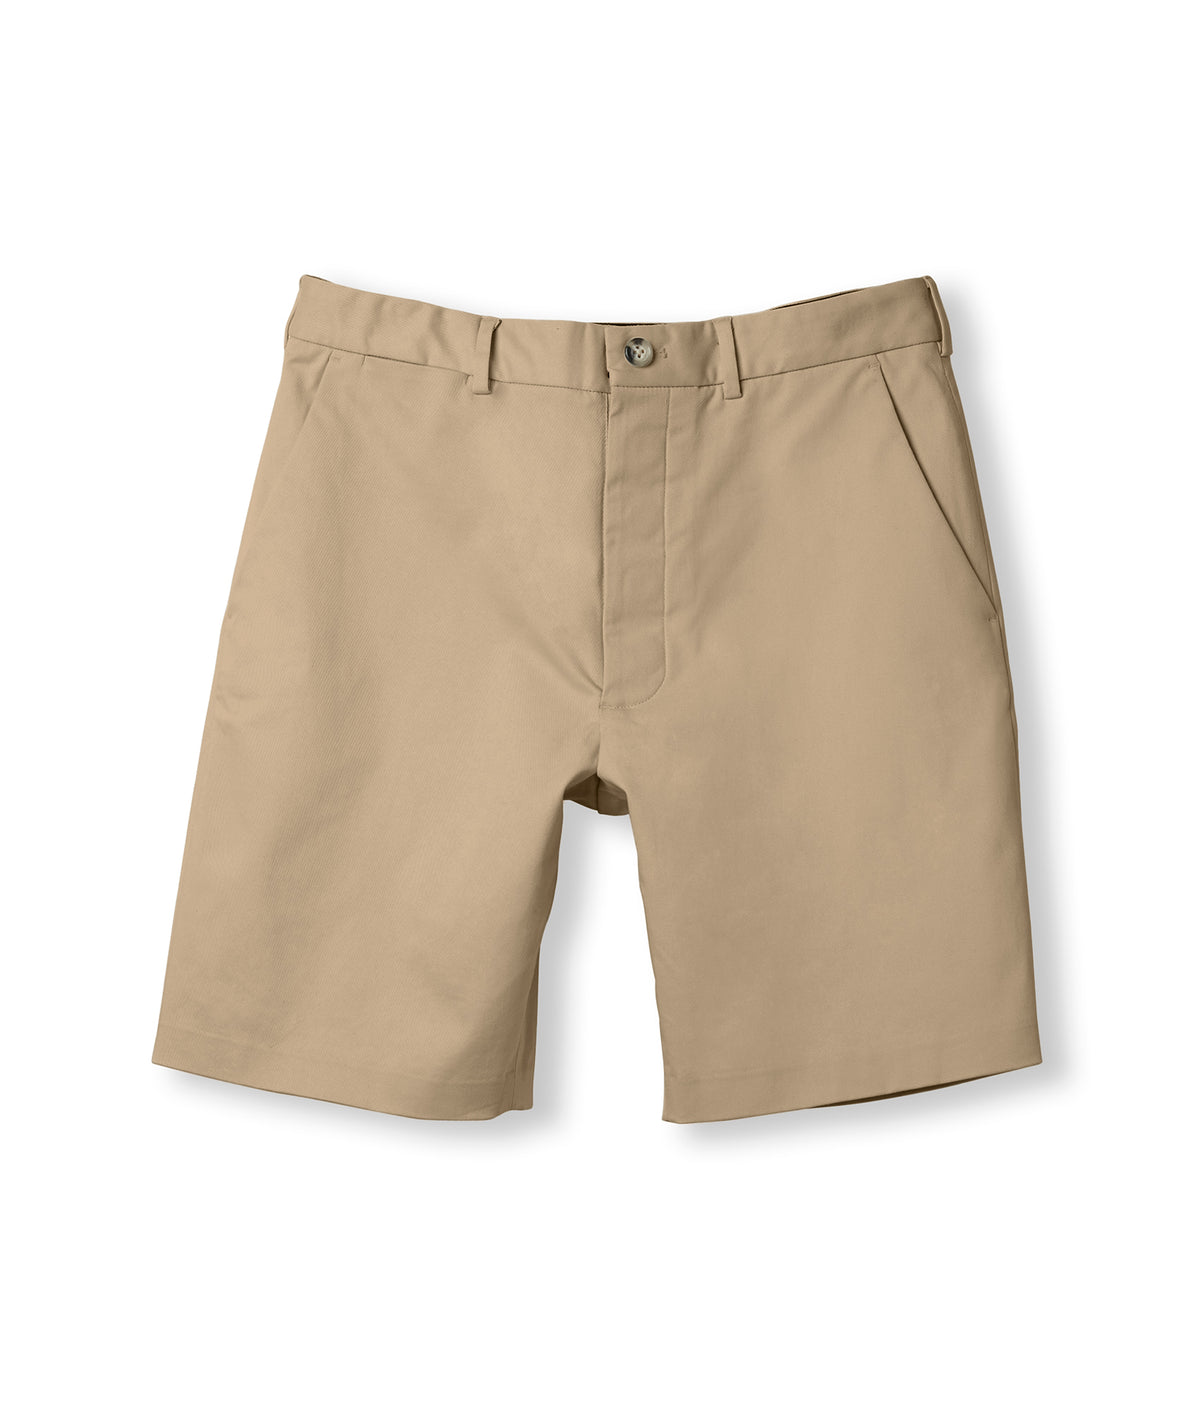 Flat Front 'Fordham' Easy-Care Chino Twill Short with Magnetic Closures - Khaki